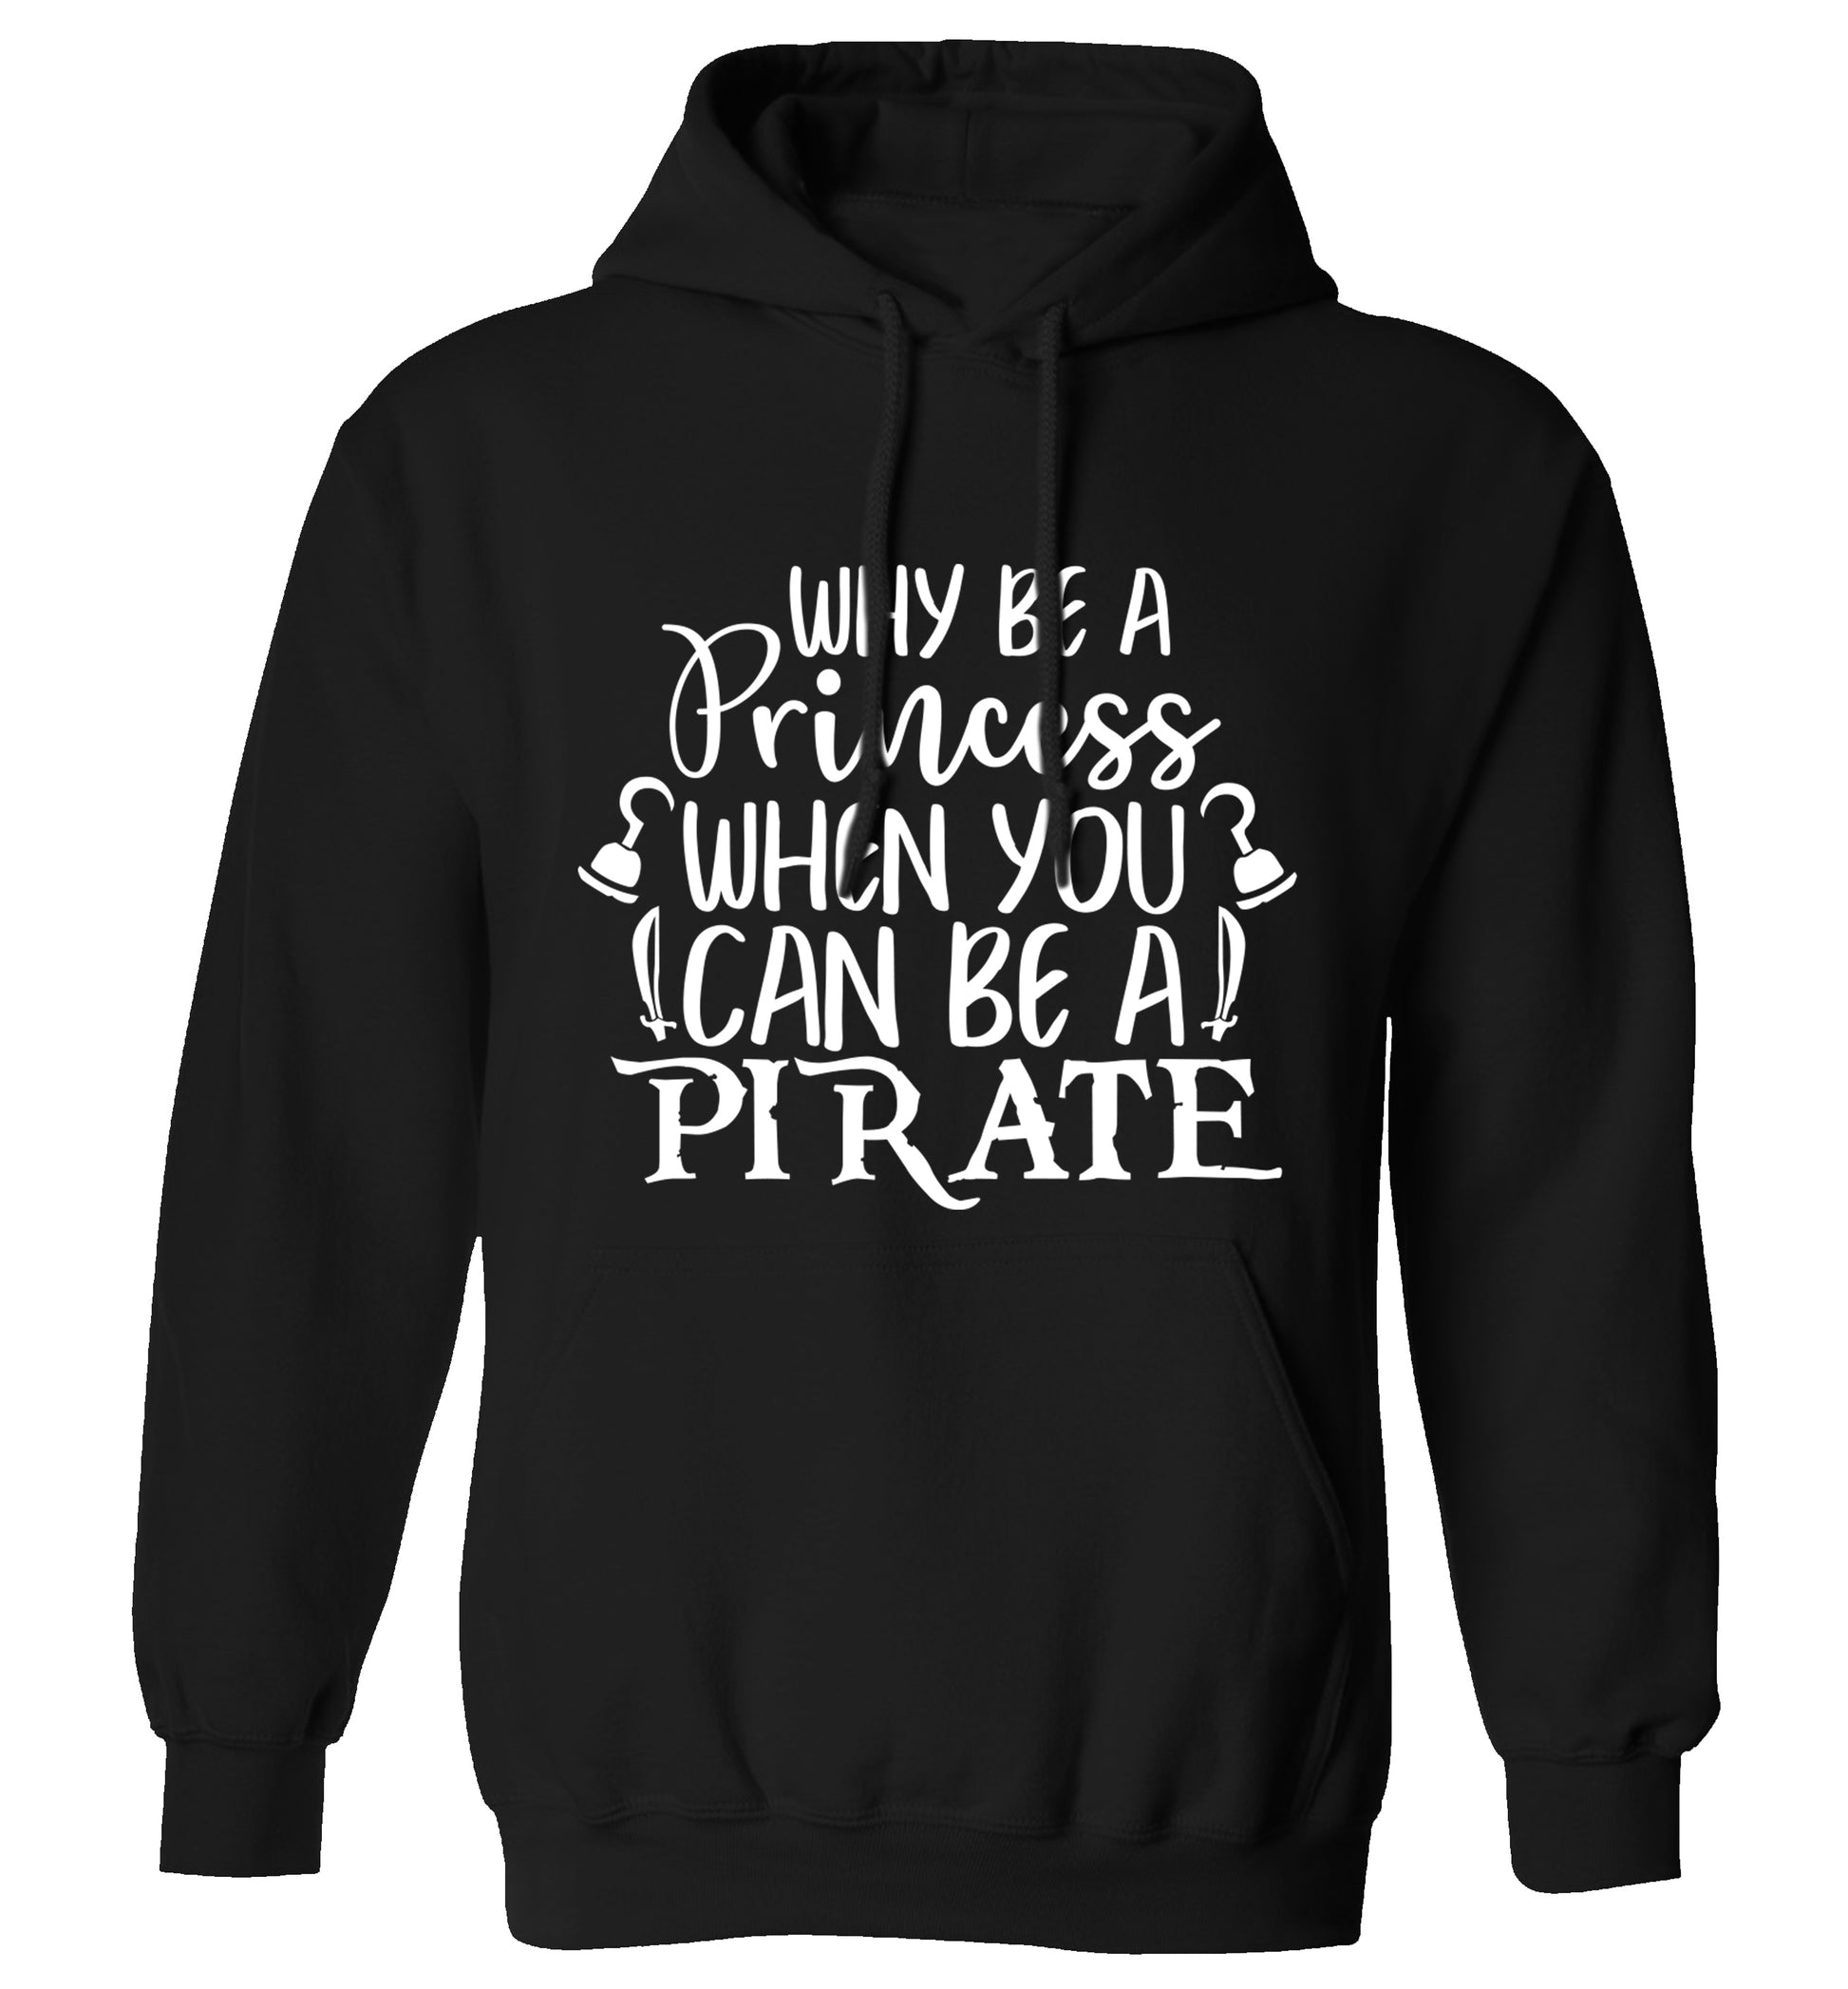 Why be a princess when you can be a pirate? adults unisex black hoodie 2XL